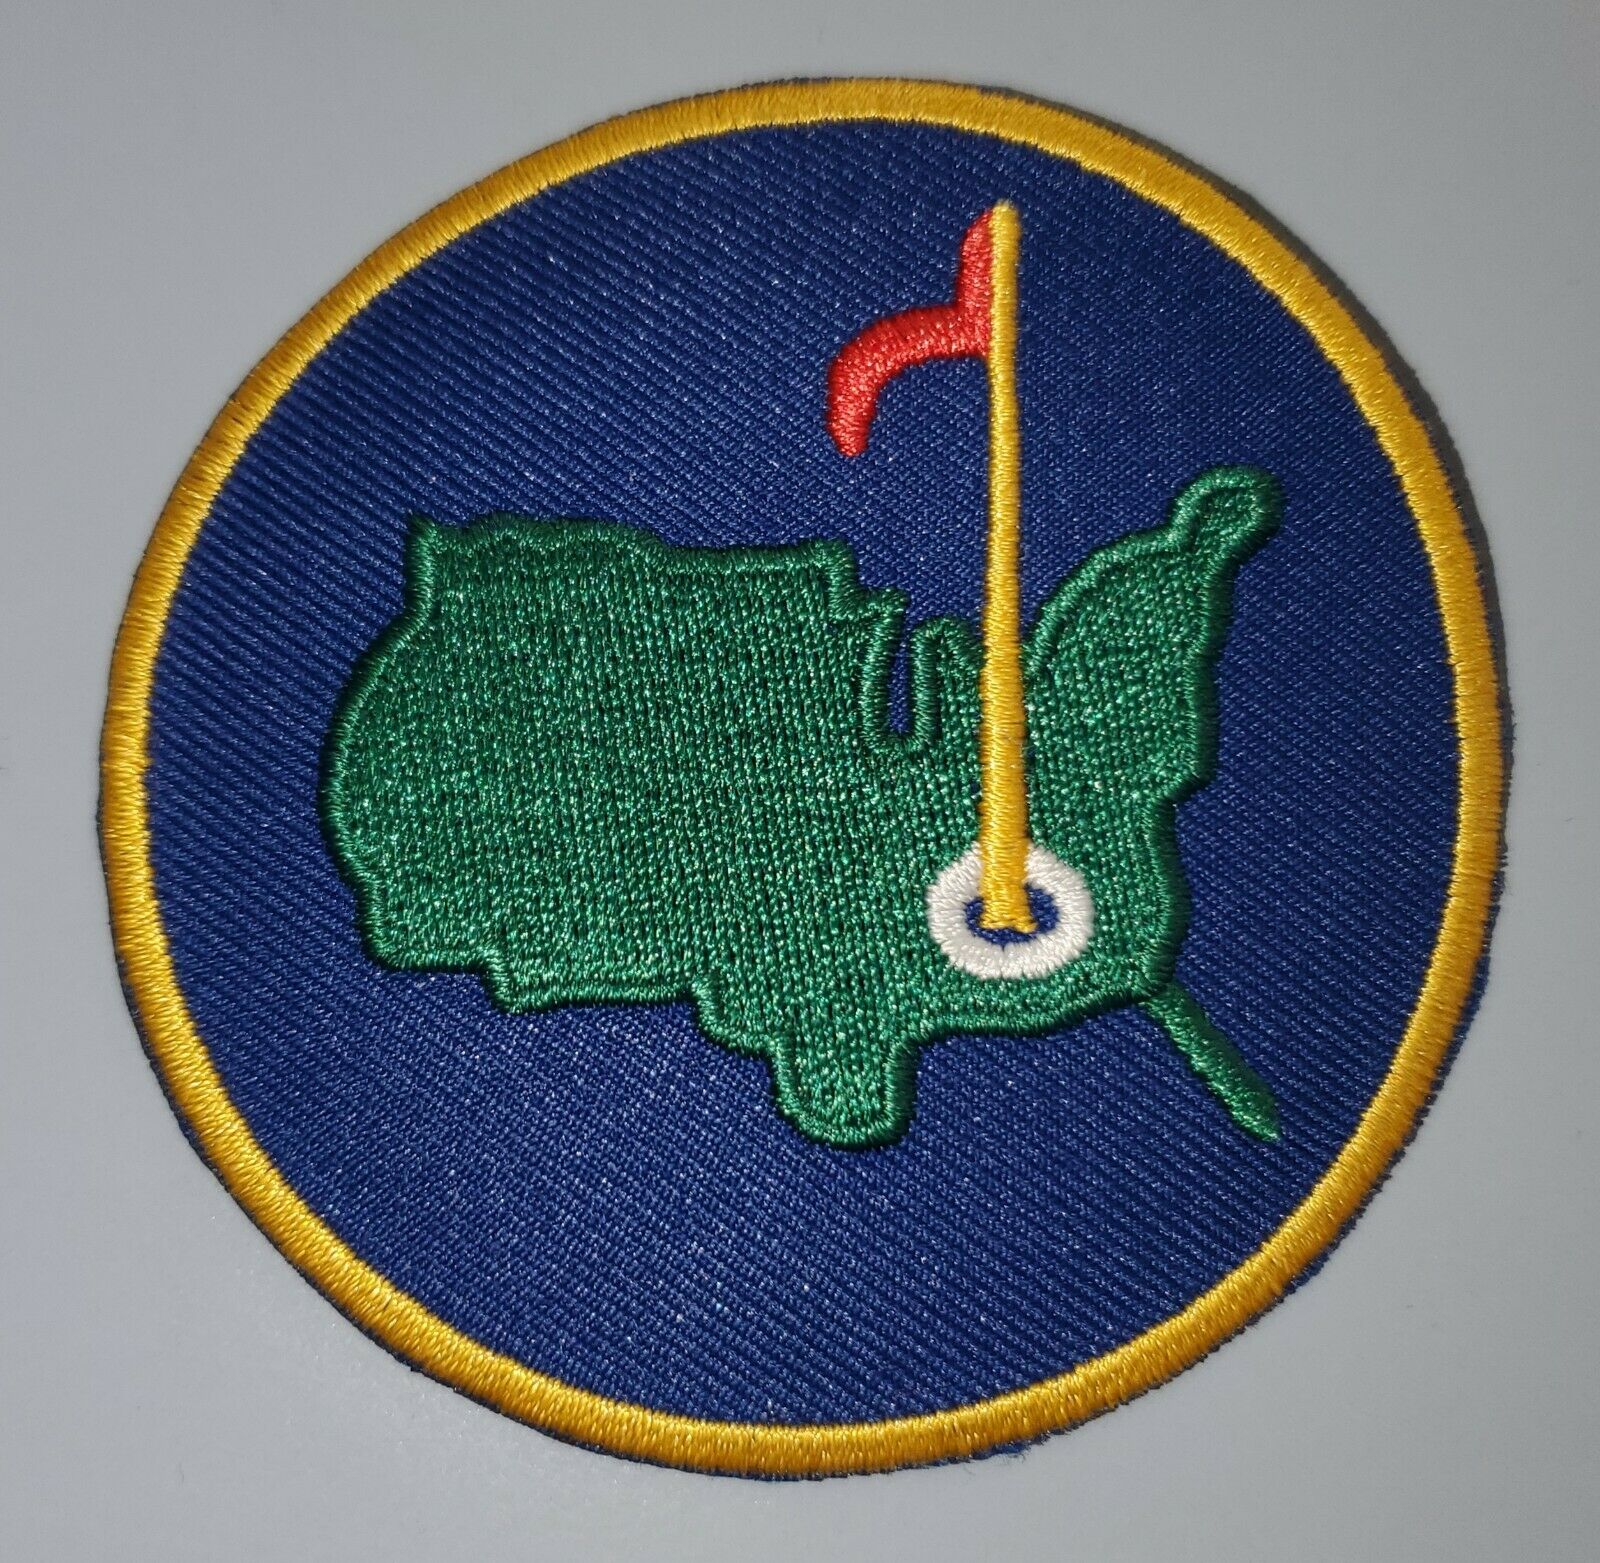 "the Masters Golf History" Embroidered Iron On 3 X 3 Patch